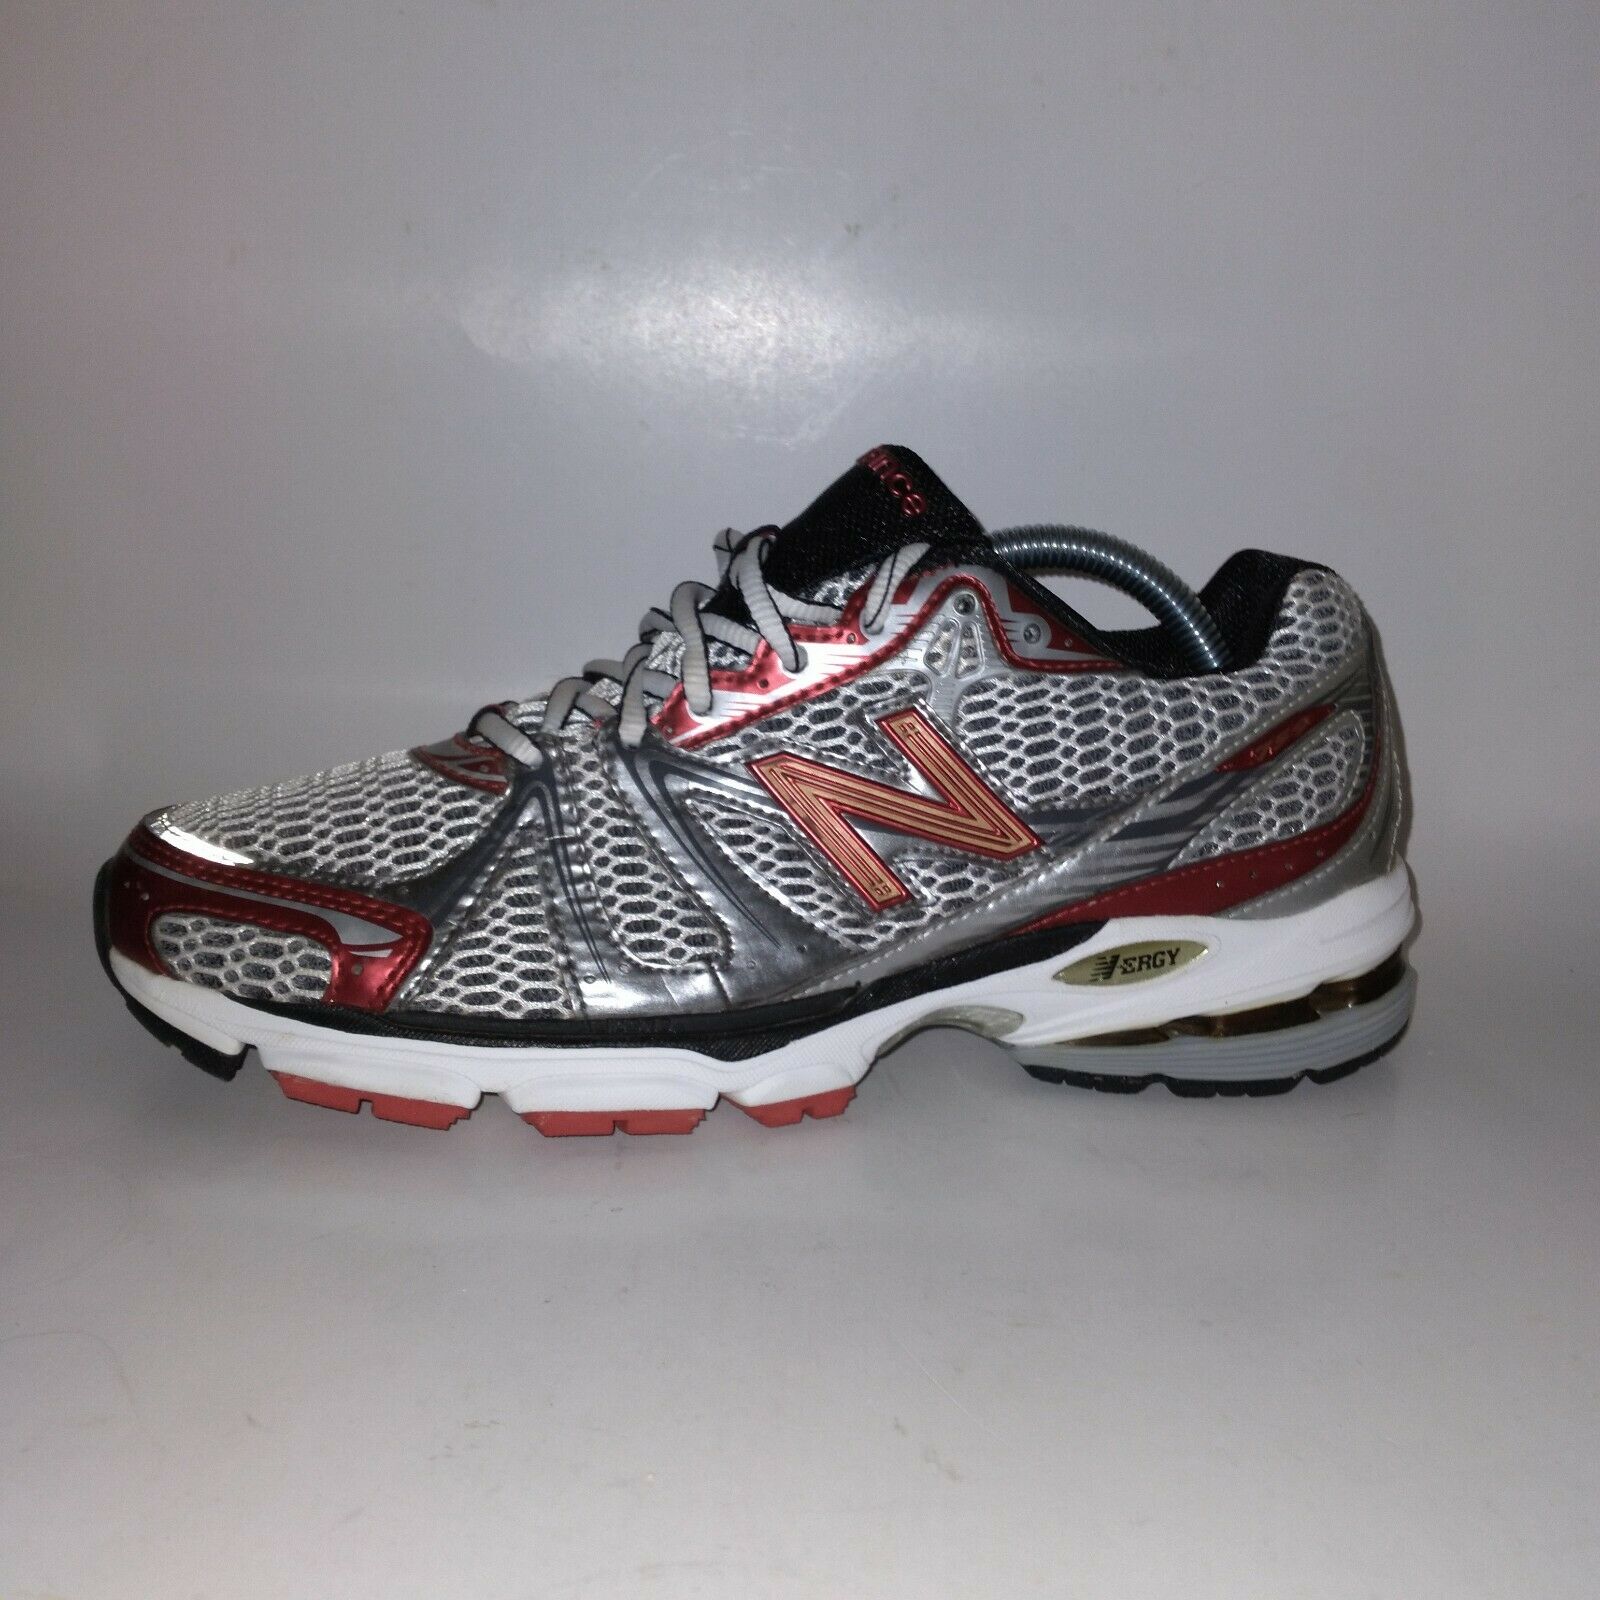 New Balance 759 Made in USA Running Walking Shoes Mens Size 8 D MR759SR